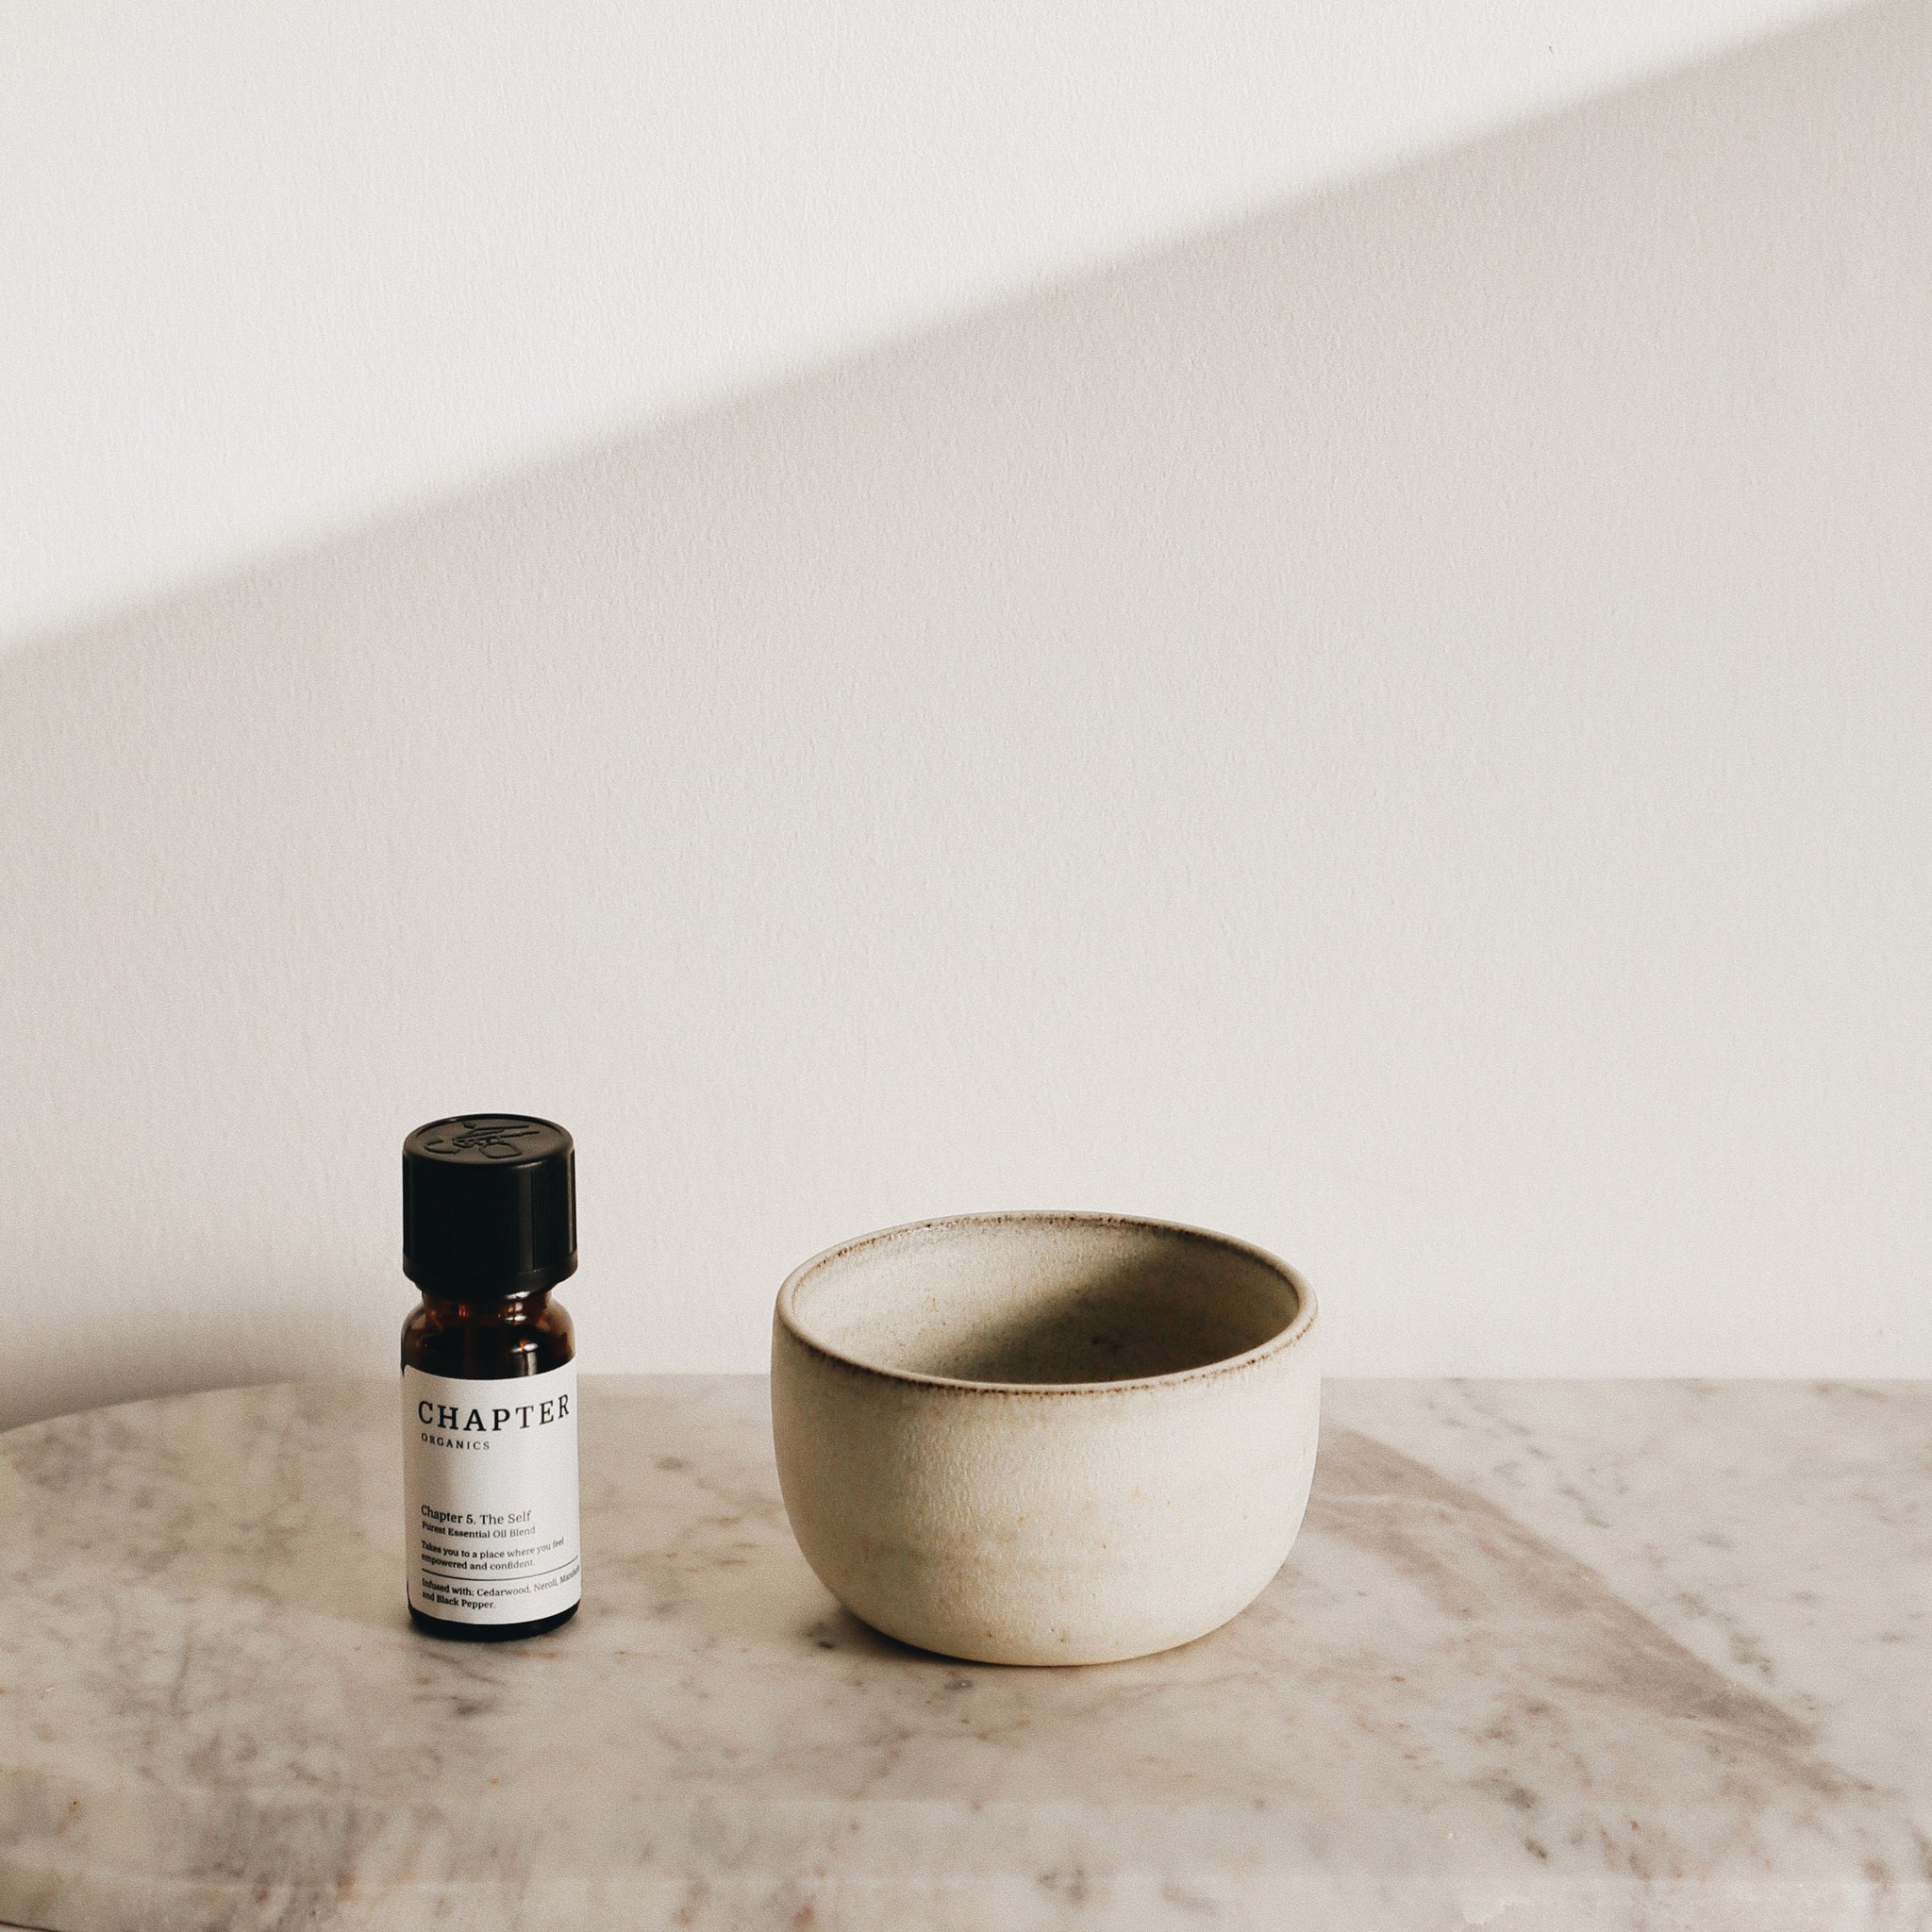 The Peace Purest Essential Oil Blend